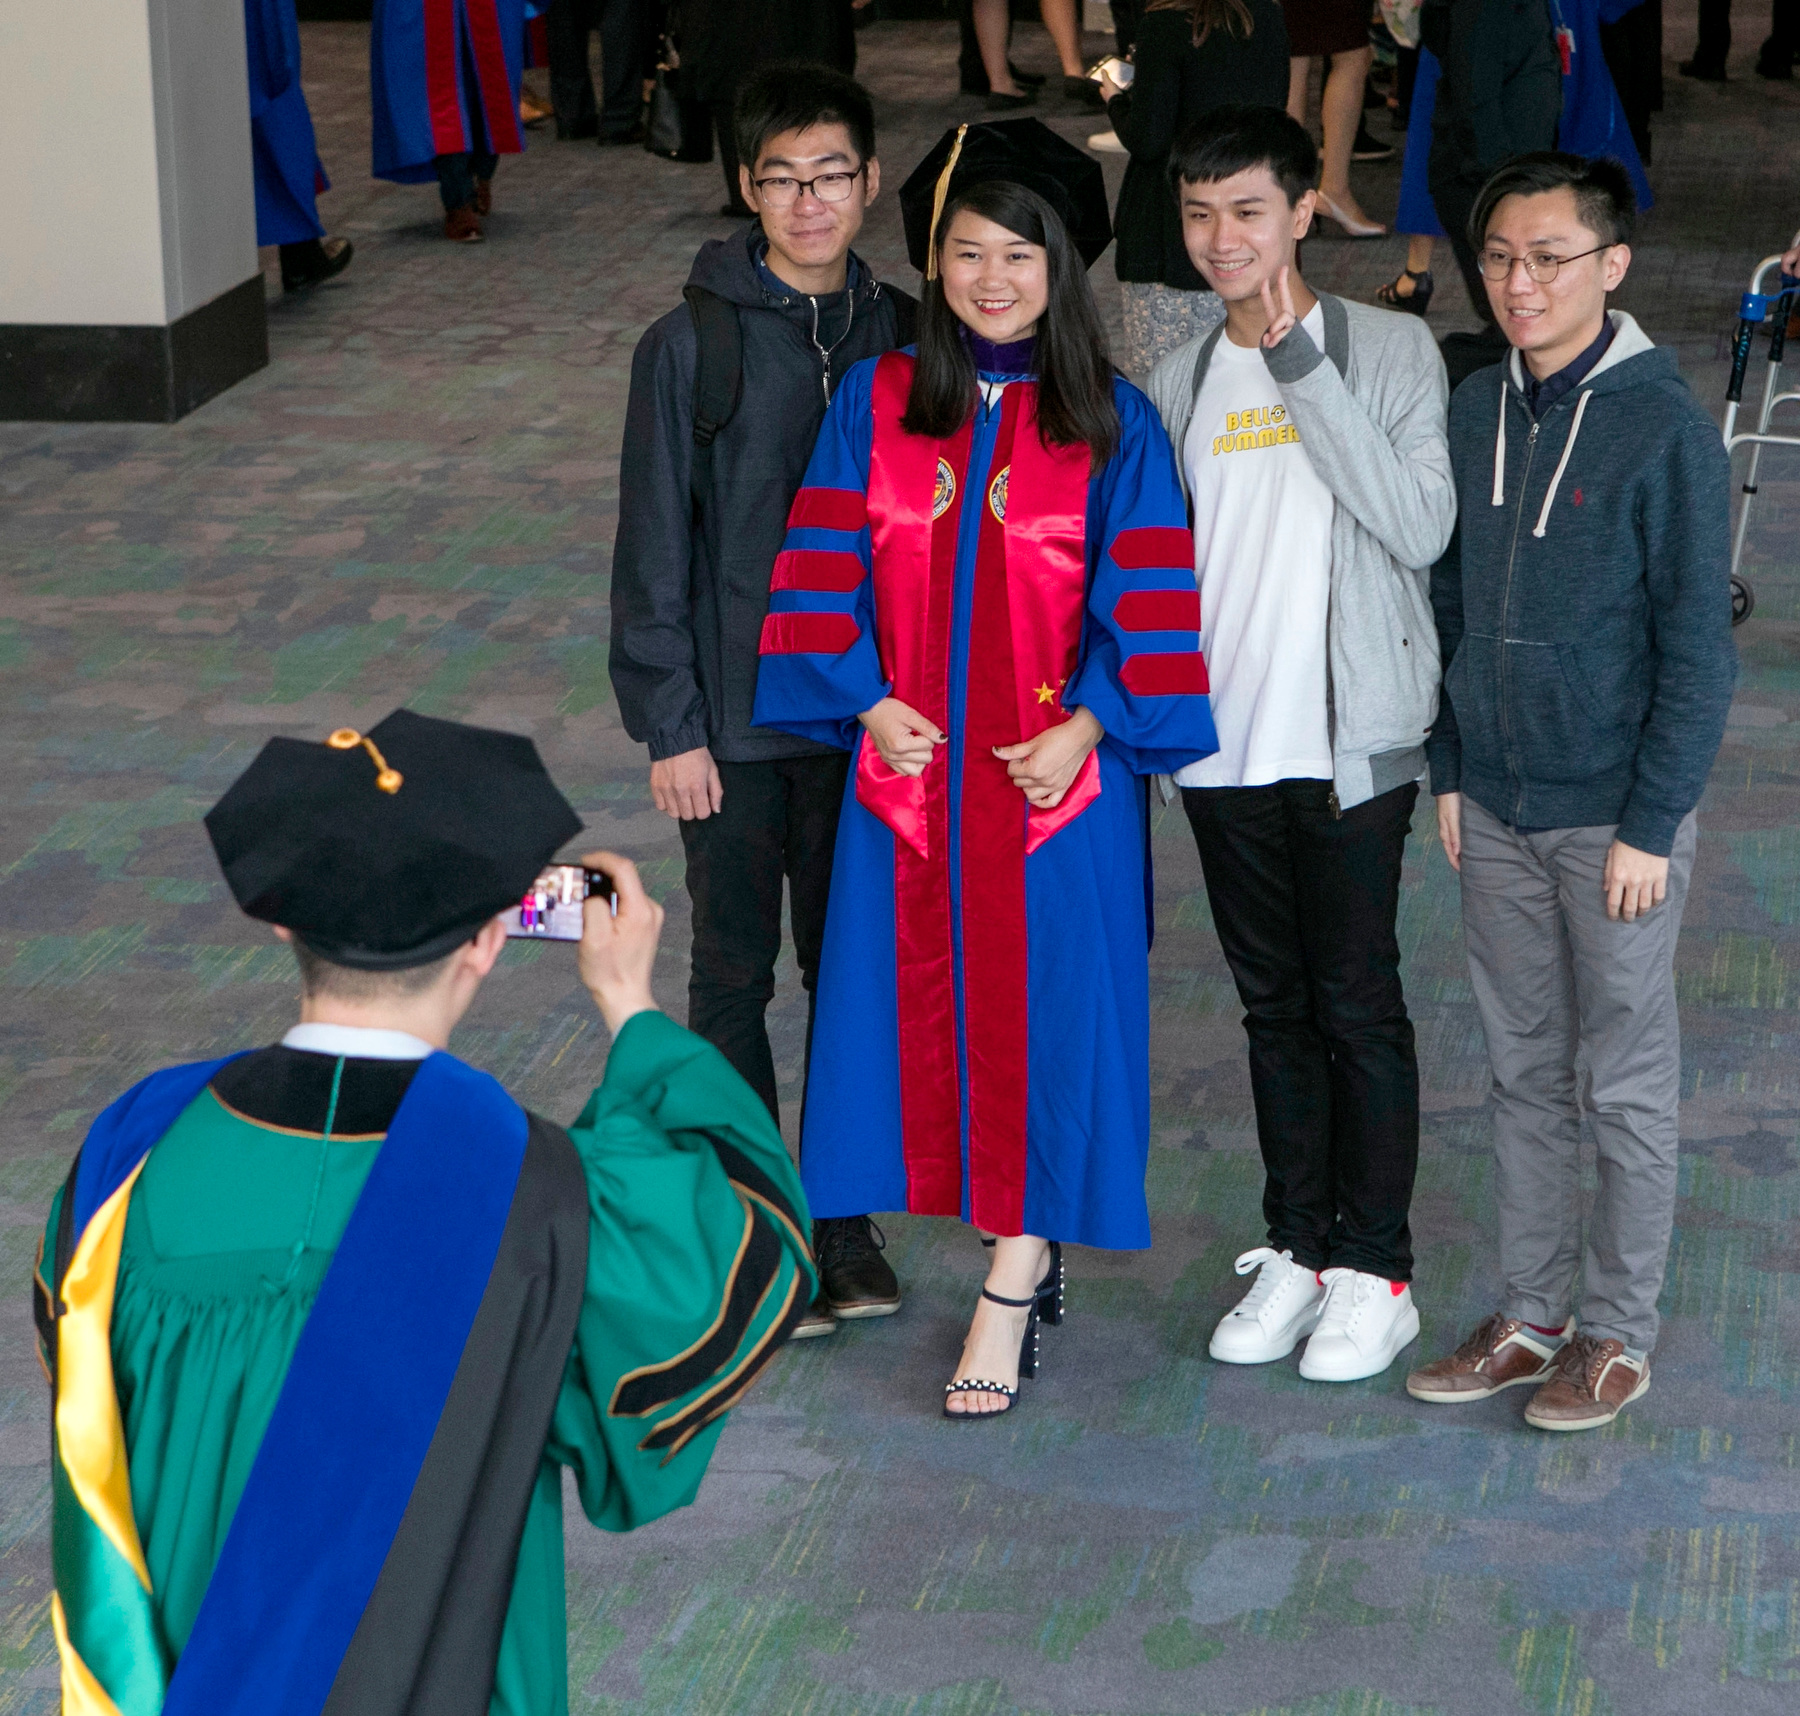 2018 College of Law Commencement Multimedia DePaul University